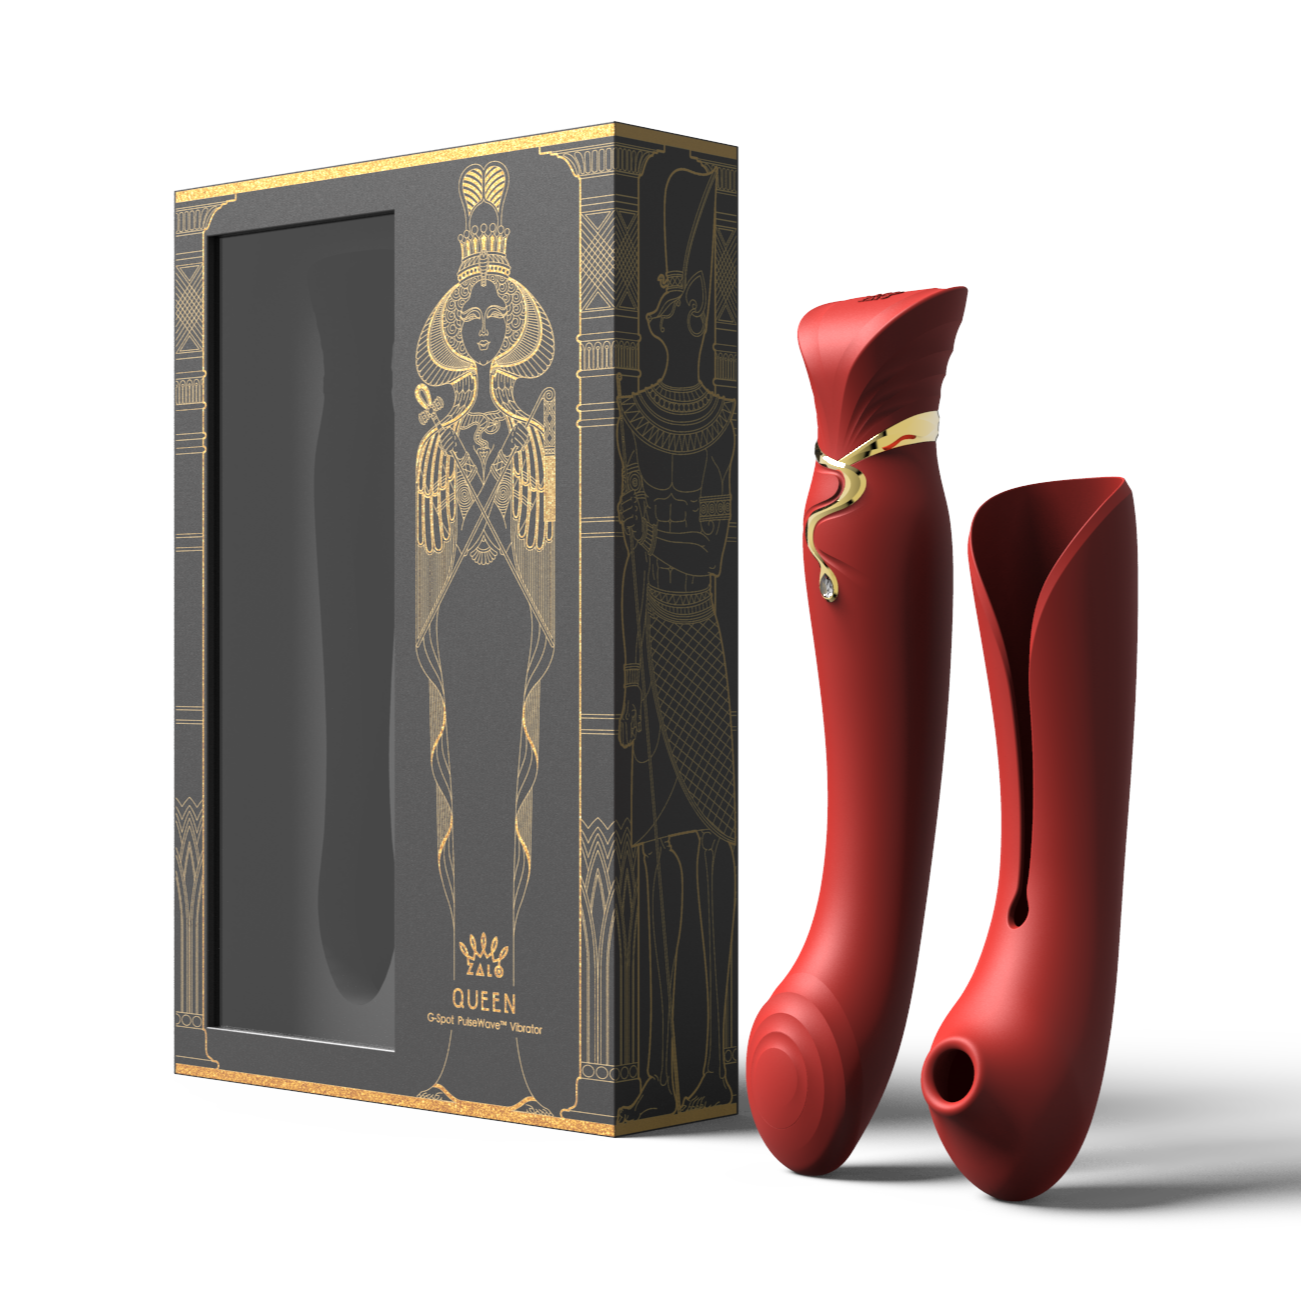 Queen Set G-spot PulseWave Vibrator with Suction Sleeve